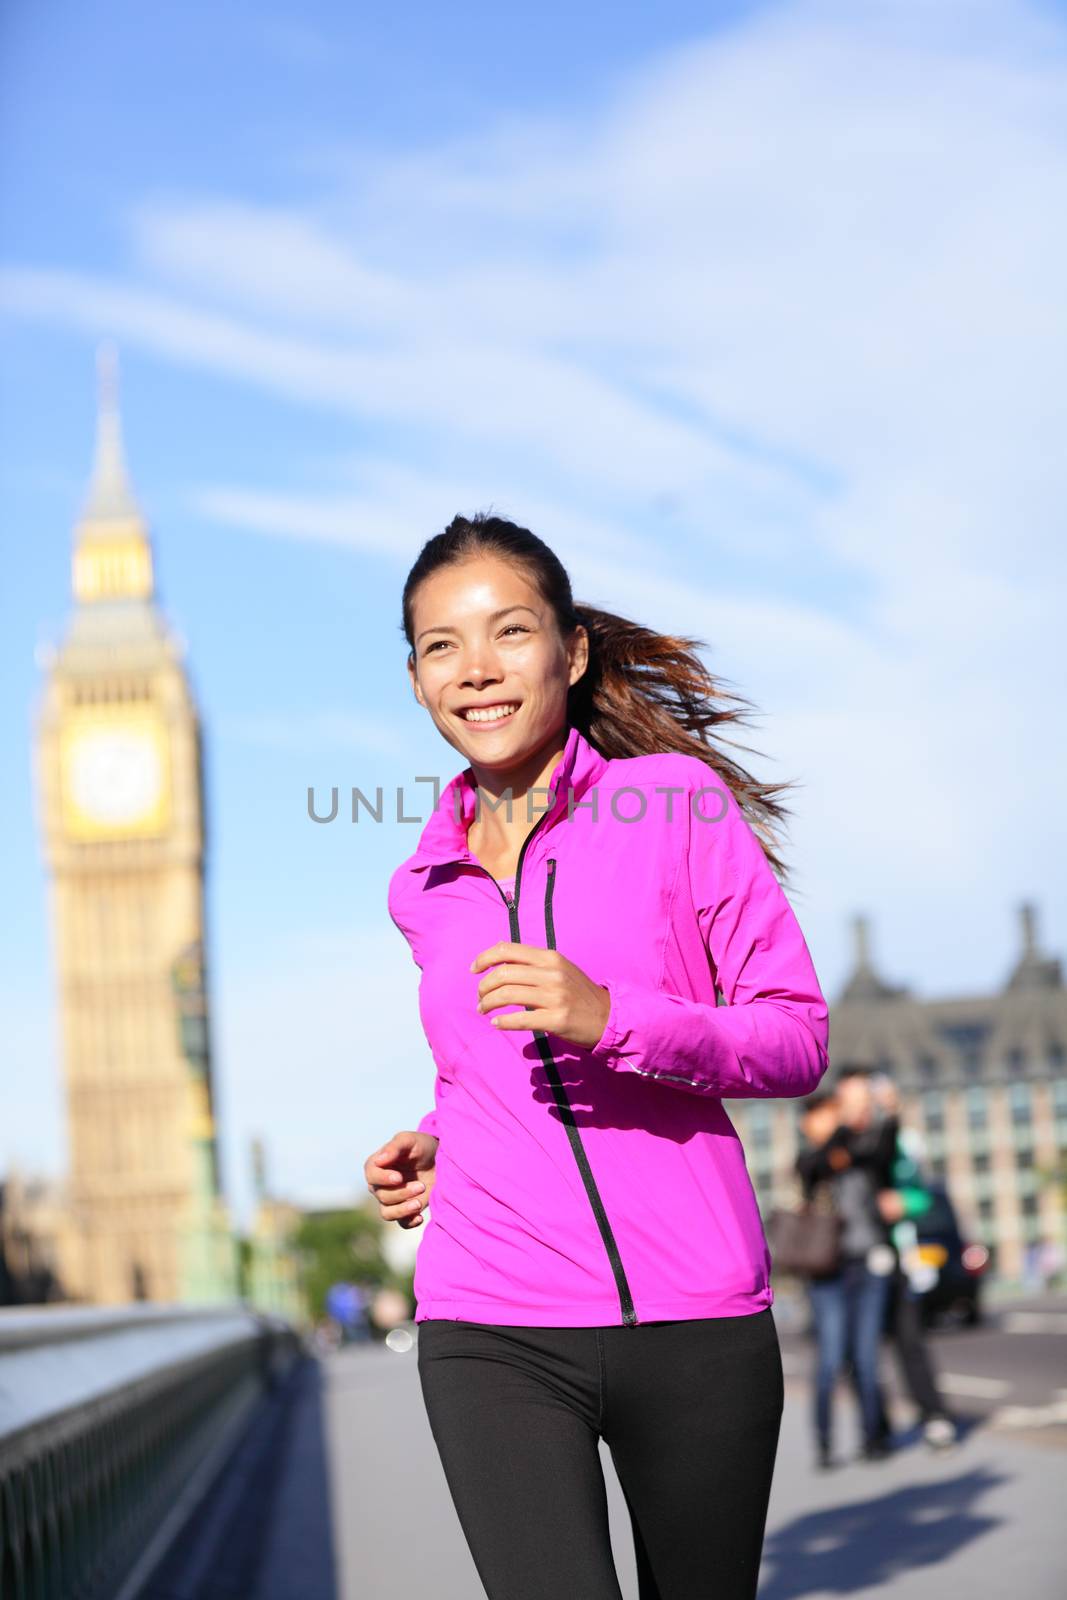 Running woman in London living healthy lifestyle. Female runner jogging near Big Ben in jacket. Urban fitness girl smiling happy working out on Westminster Bridge, London, England, United Kingdom.